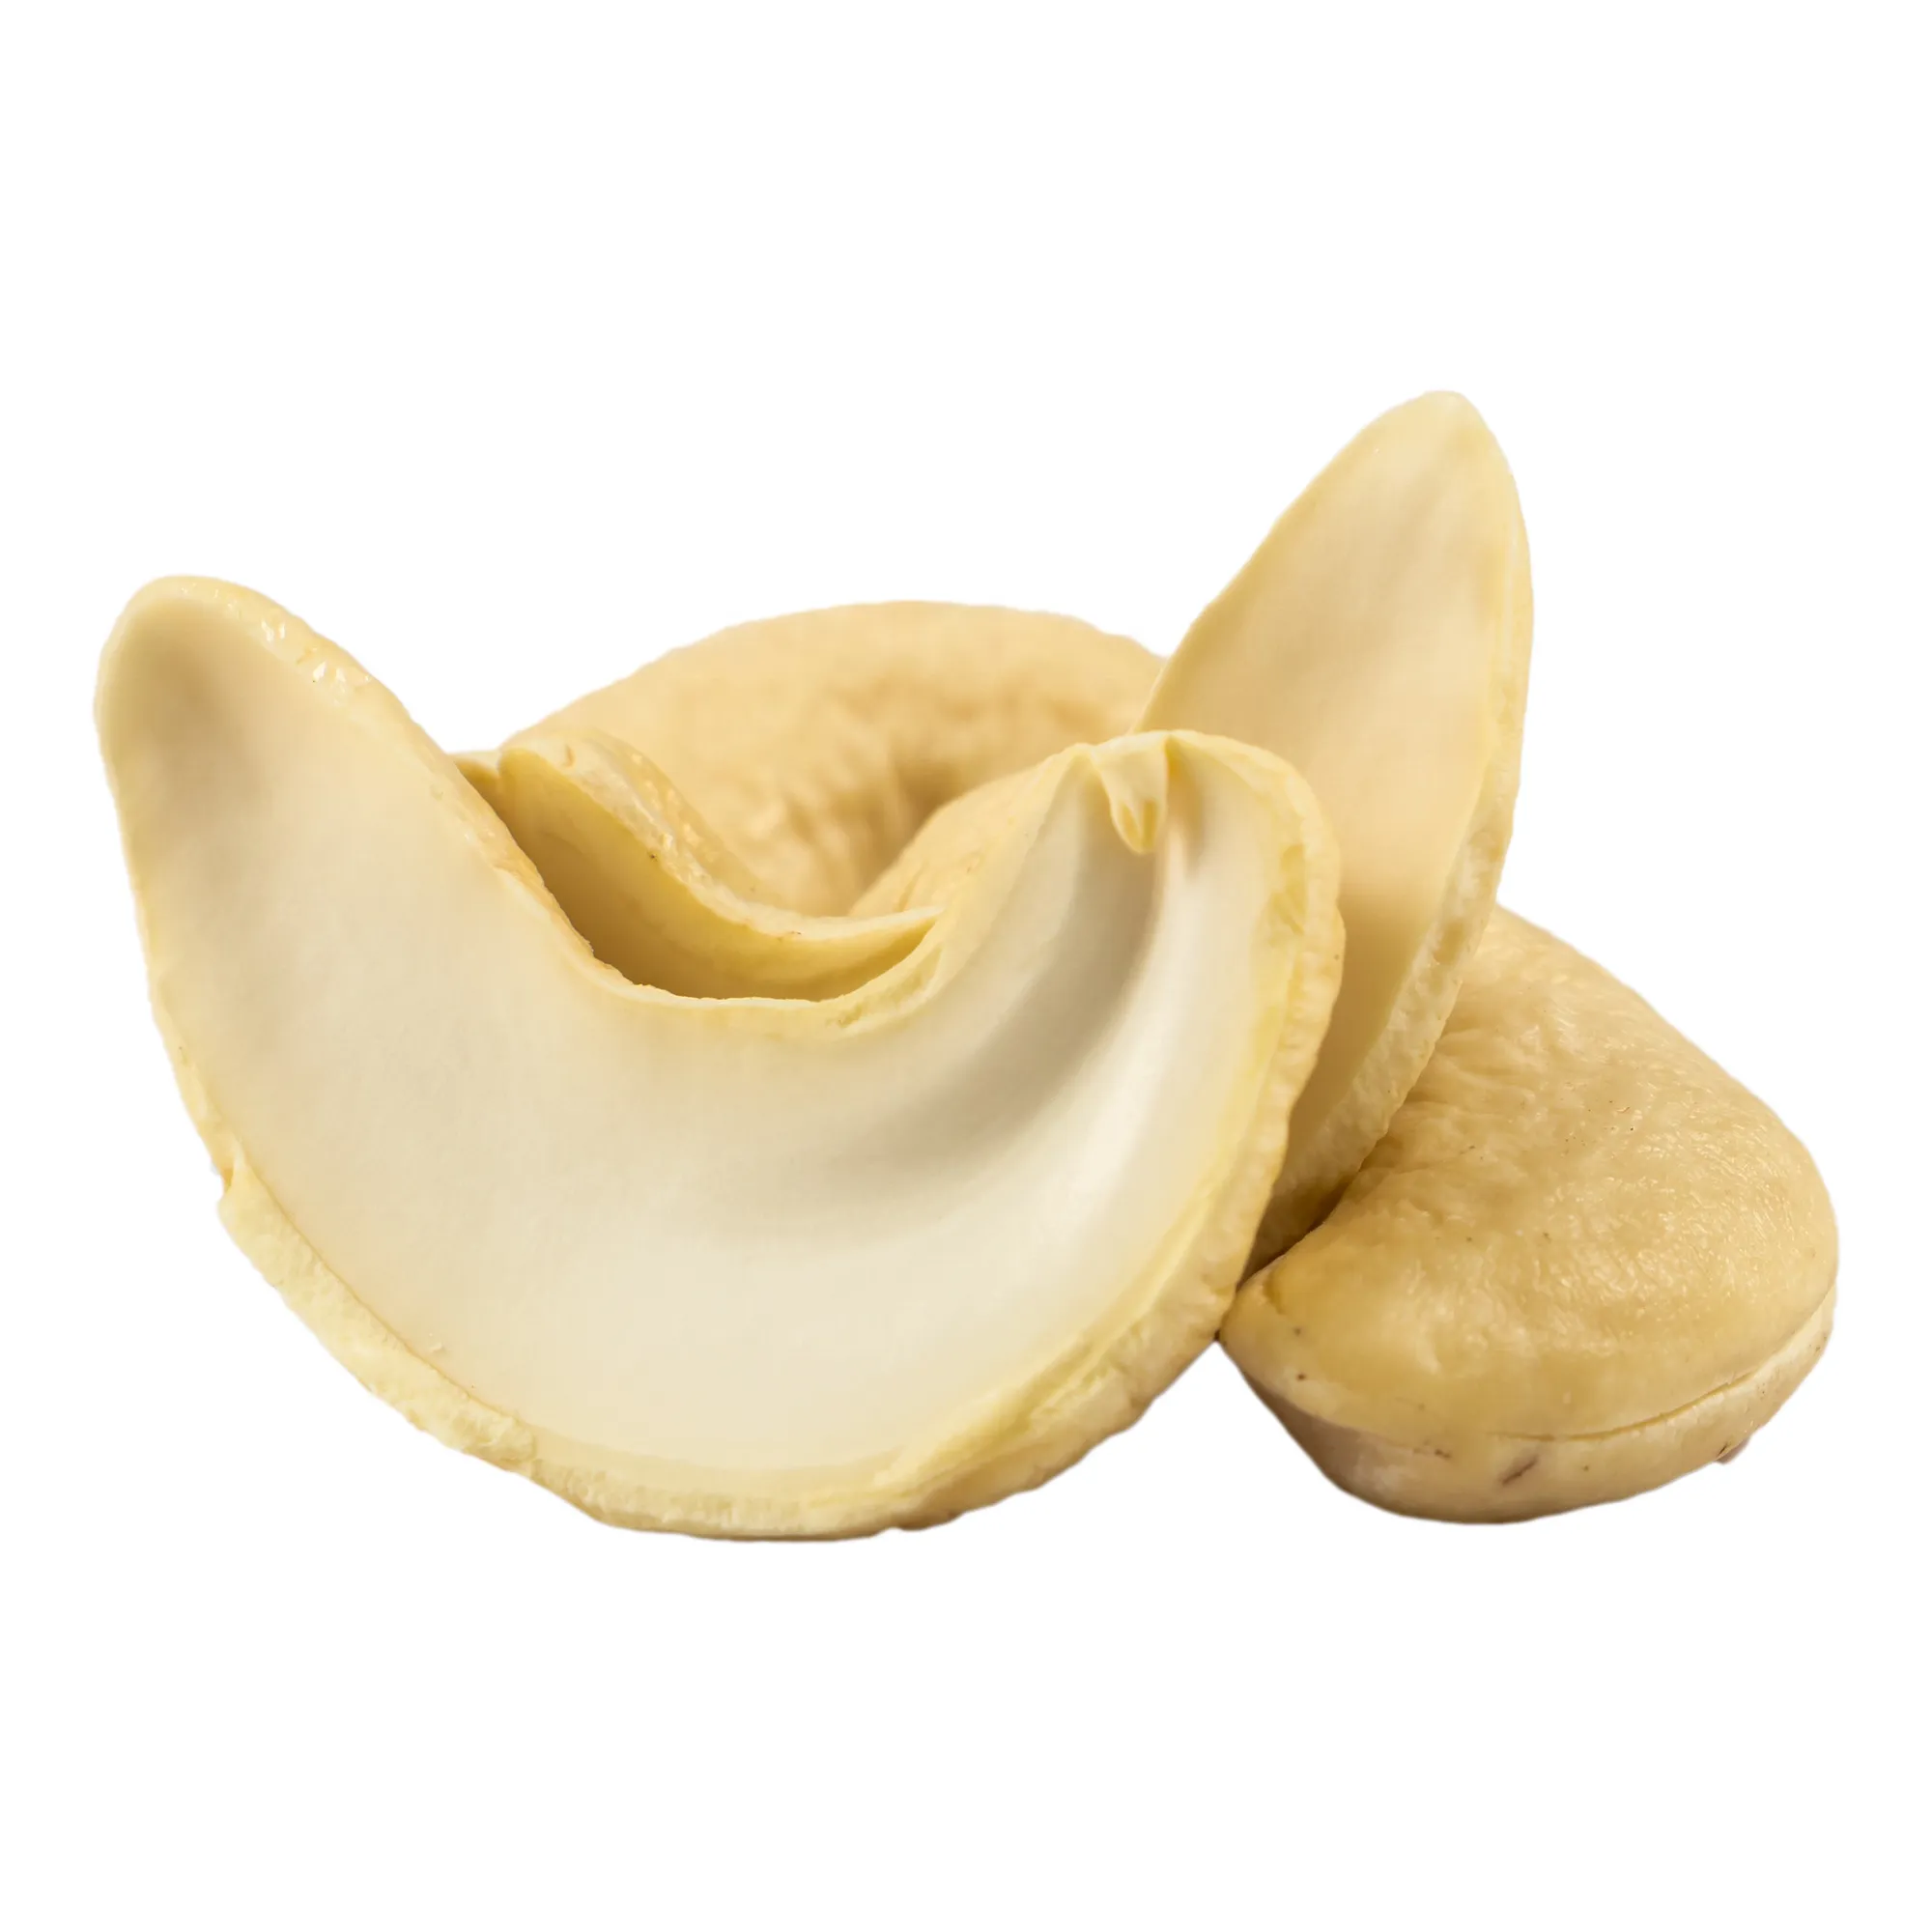 Buy raw cashew nuts edible + best price